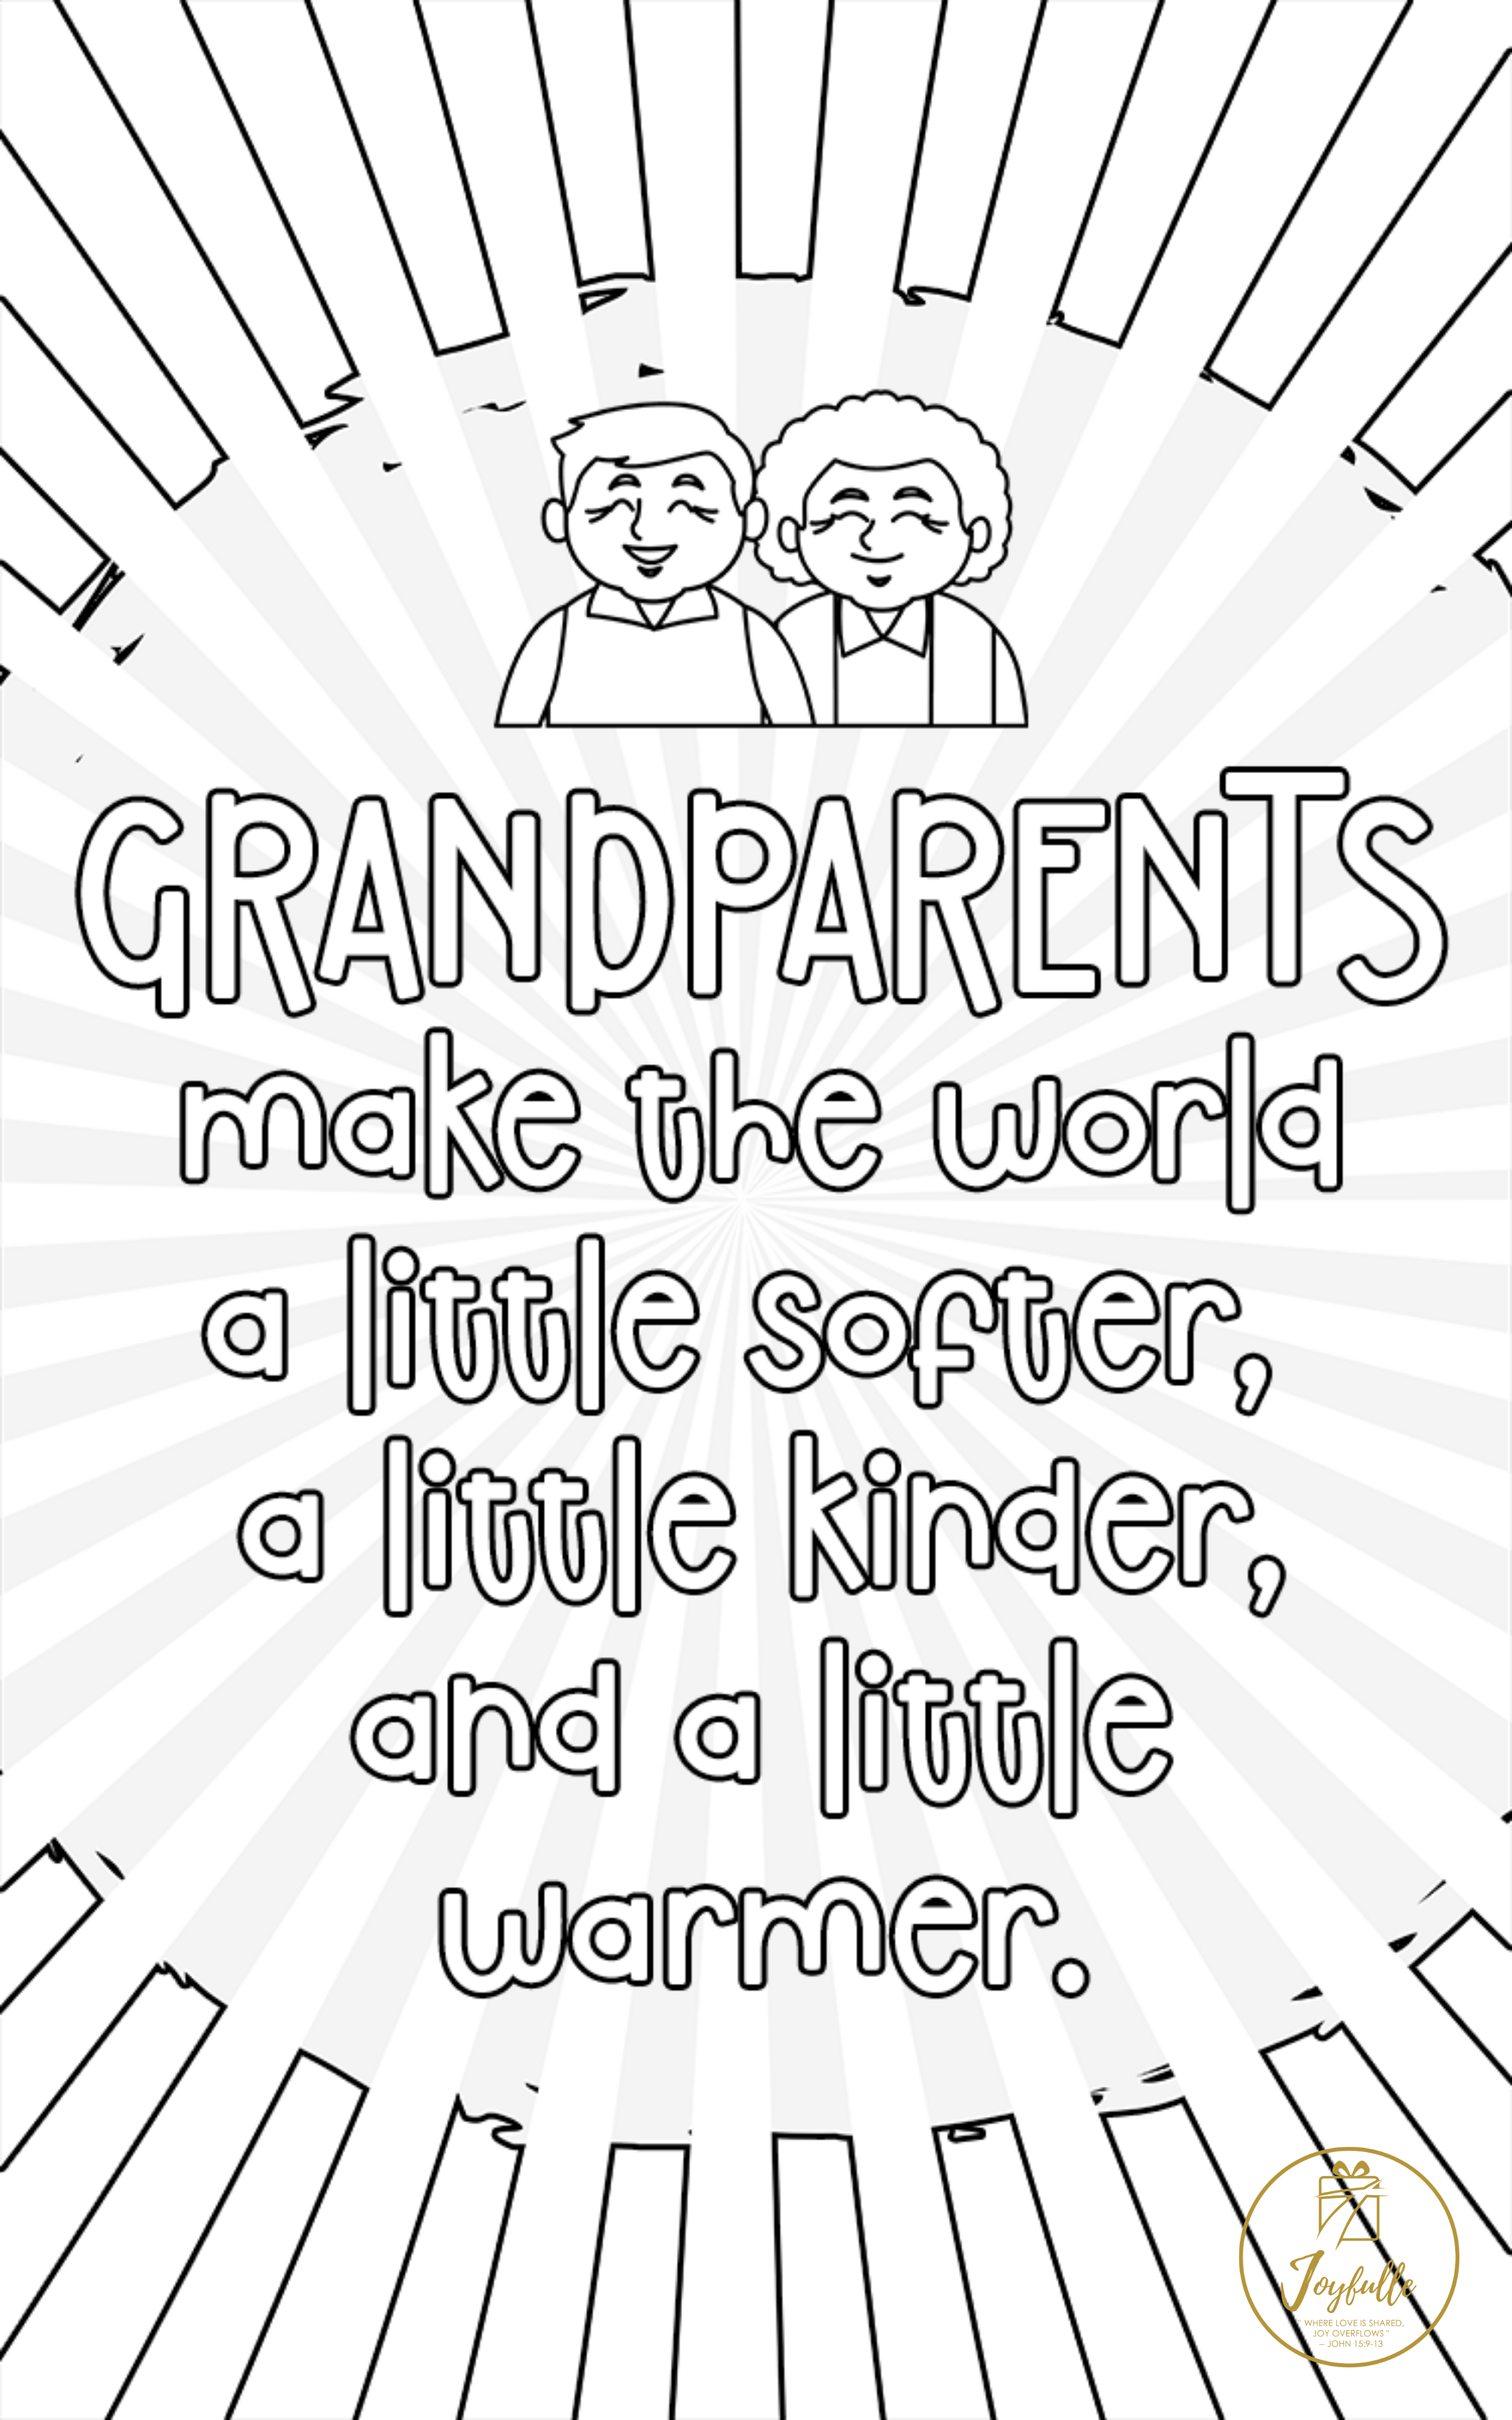 Grandparents make the world a little softer a little kinder and a little warmer printables greeting card